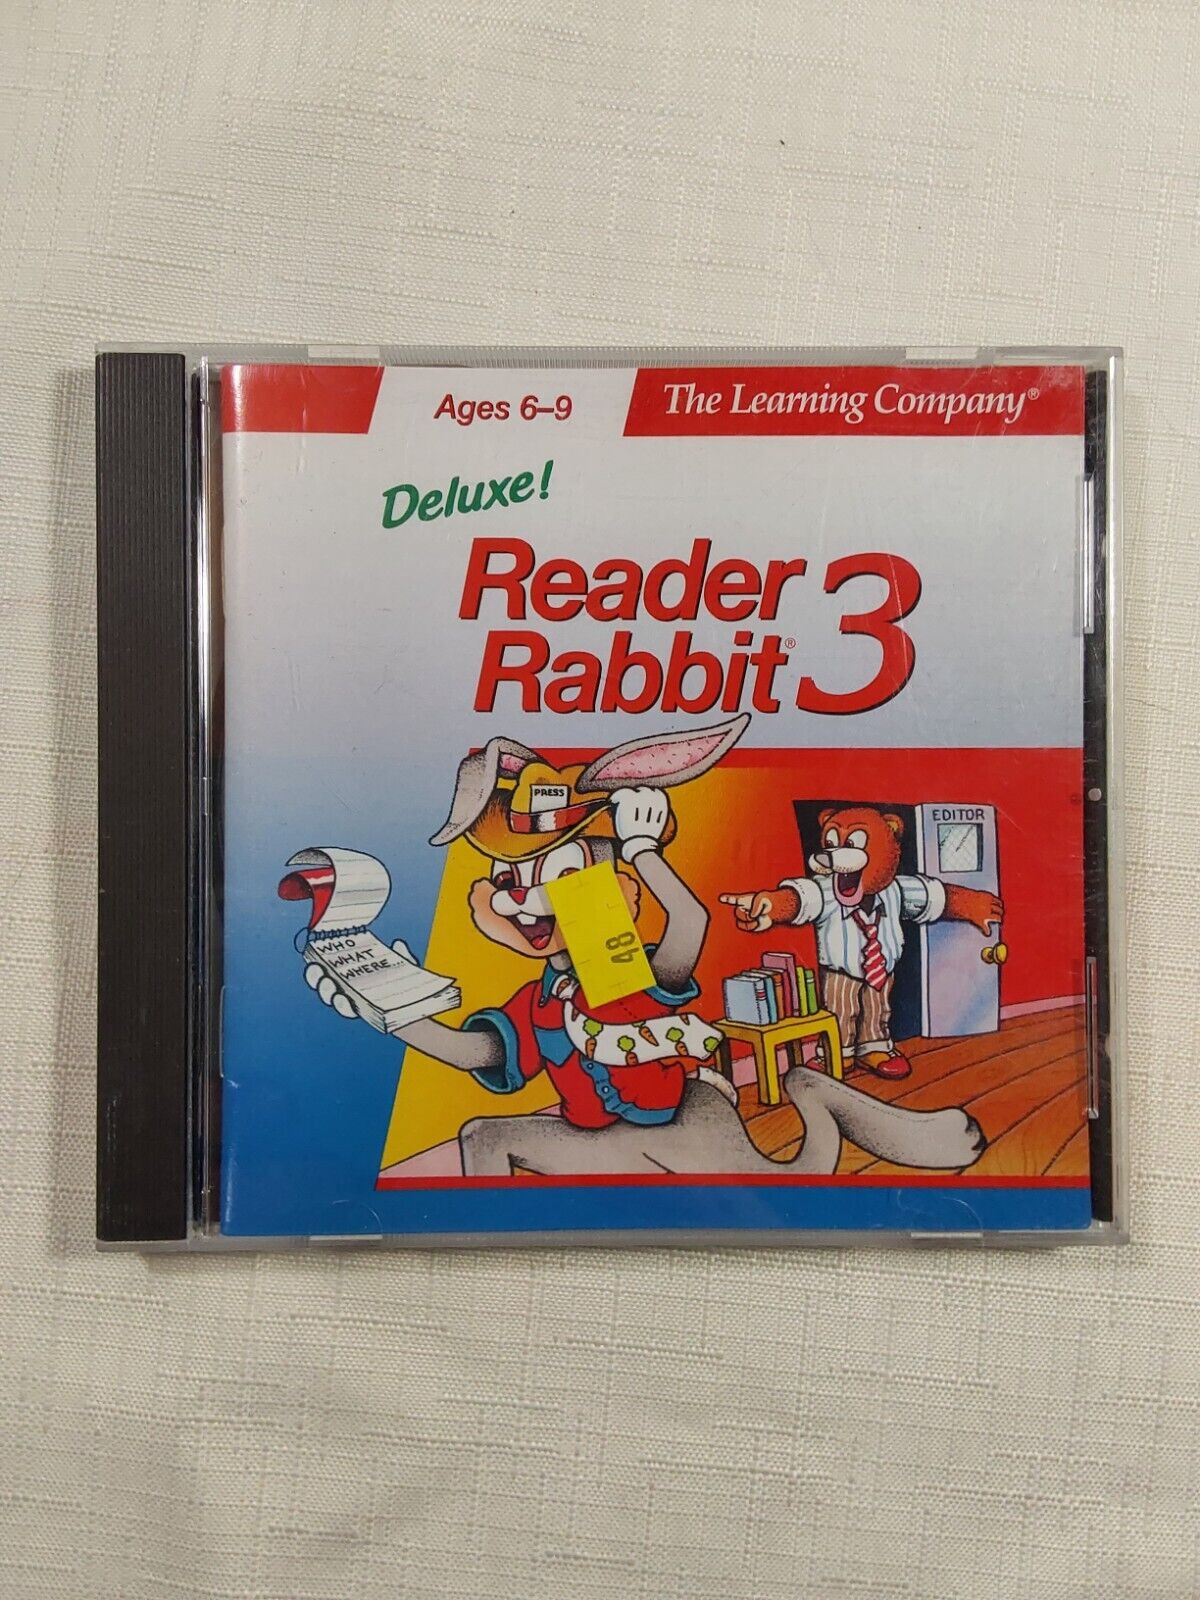 The Learning Company Reader Rabbit 3 Deluxe Ages 6-9 Music CD-ROM